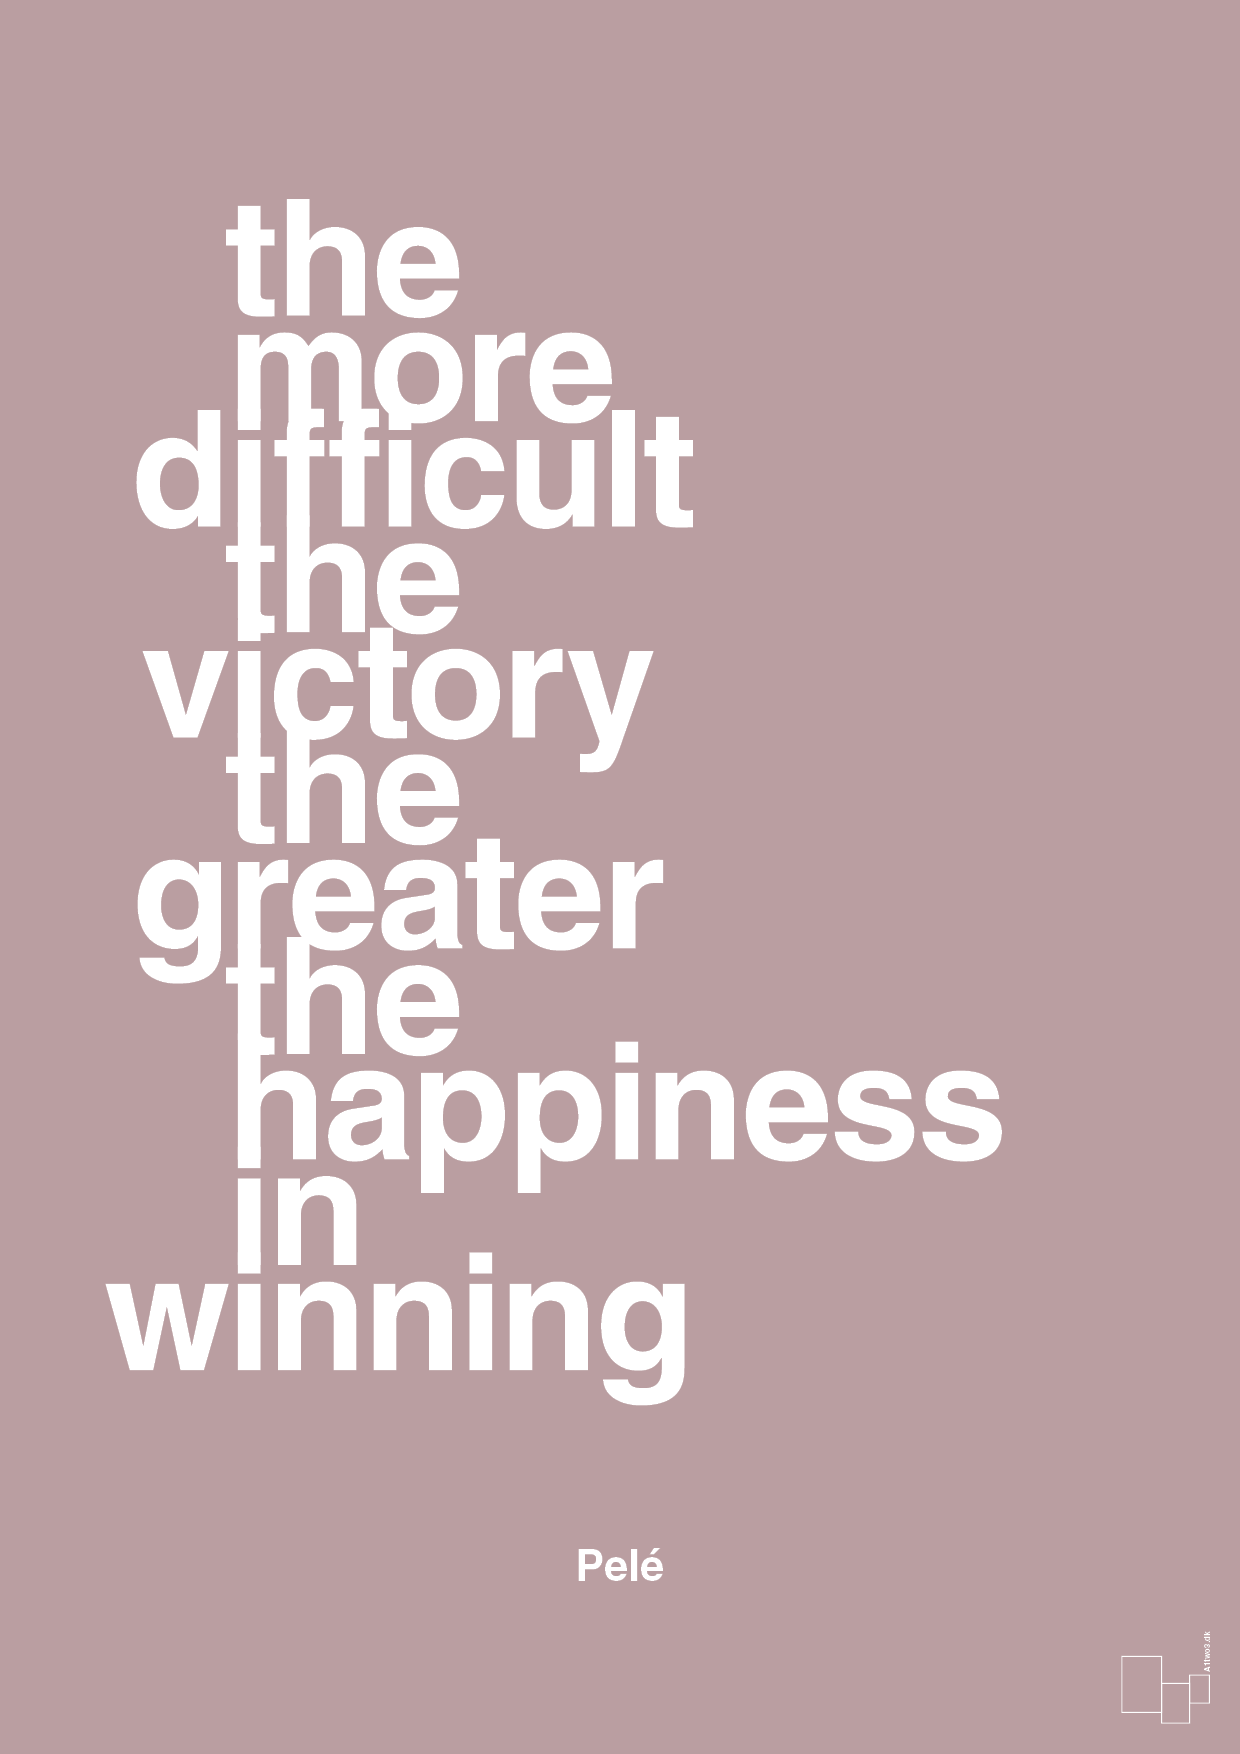 the more difficult the victory the greater the happiness in winning - Plakat med Citater i Light Rose